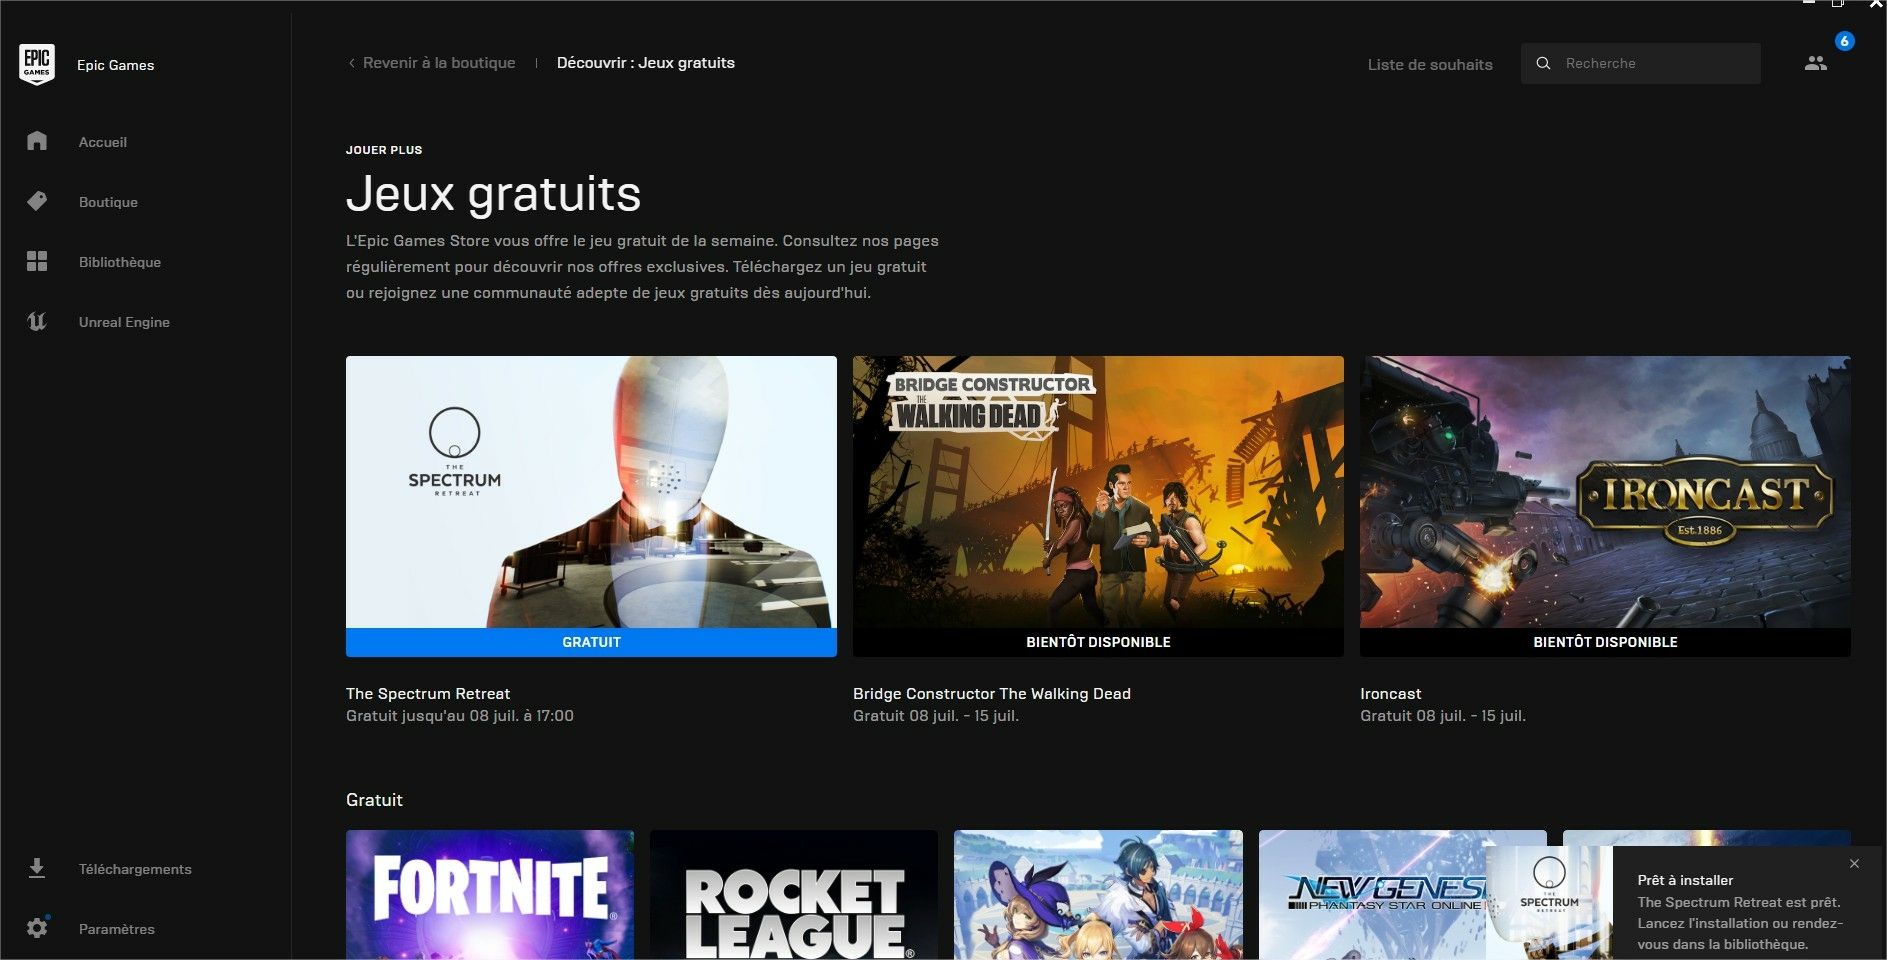 the Epic Games Store is getting bigger and closer to Steam